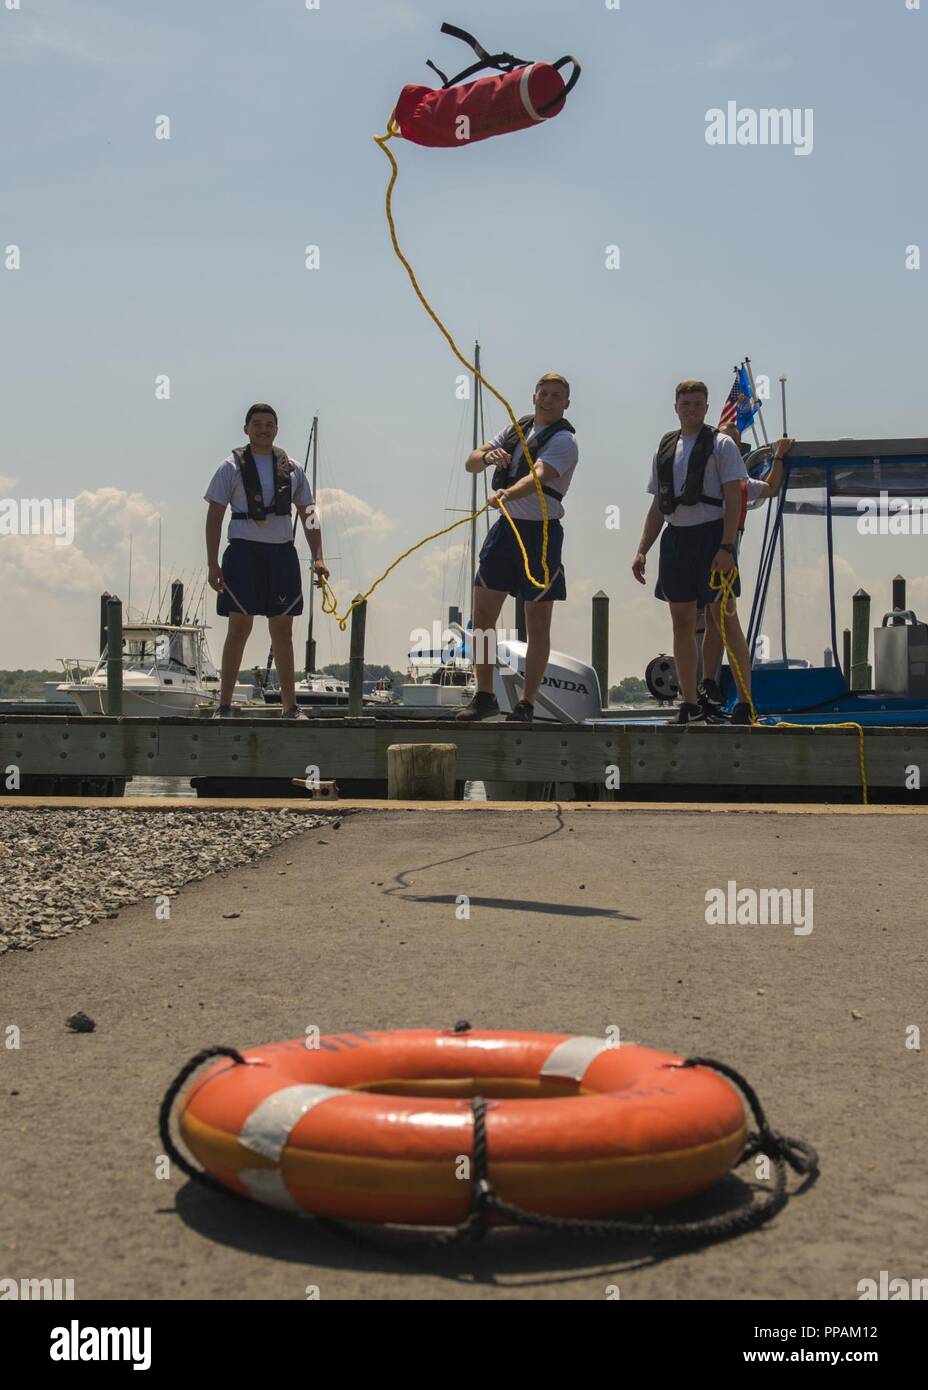 U.S. Air Force Airmen assigned to the 633rd Security Forces Squadron toss a rope at Joint Base Langley-Eustis, Virginia, Aug. 15, 2018. During the Boat Operations and Training course participants practiced proper rescue techniques on land before performing the techniques on a vessel. Stock Photo